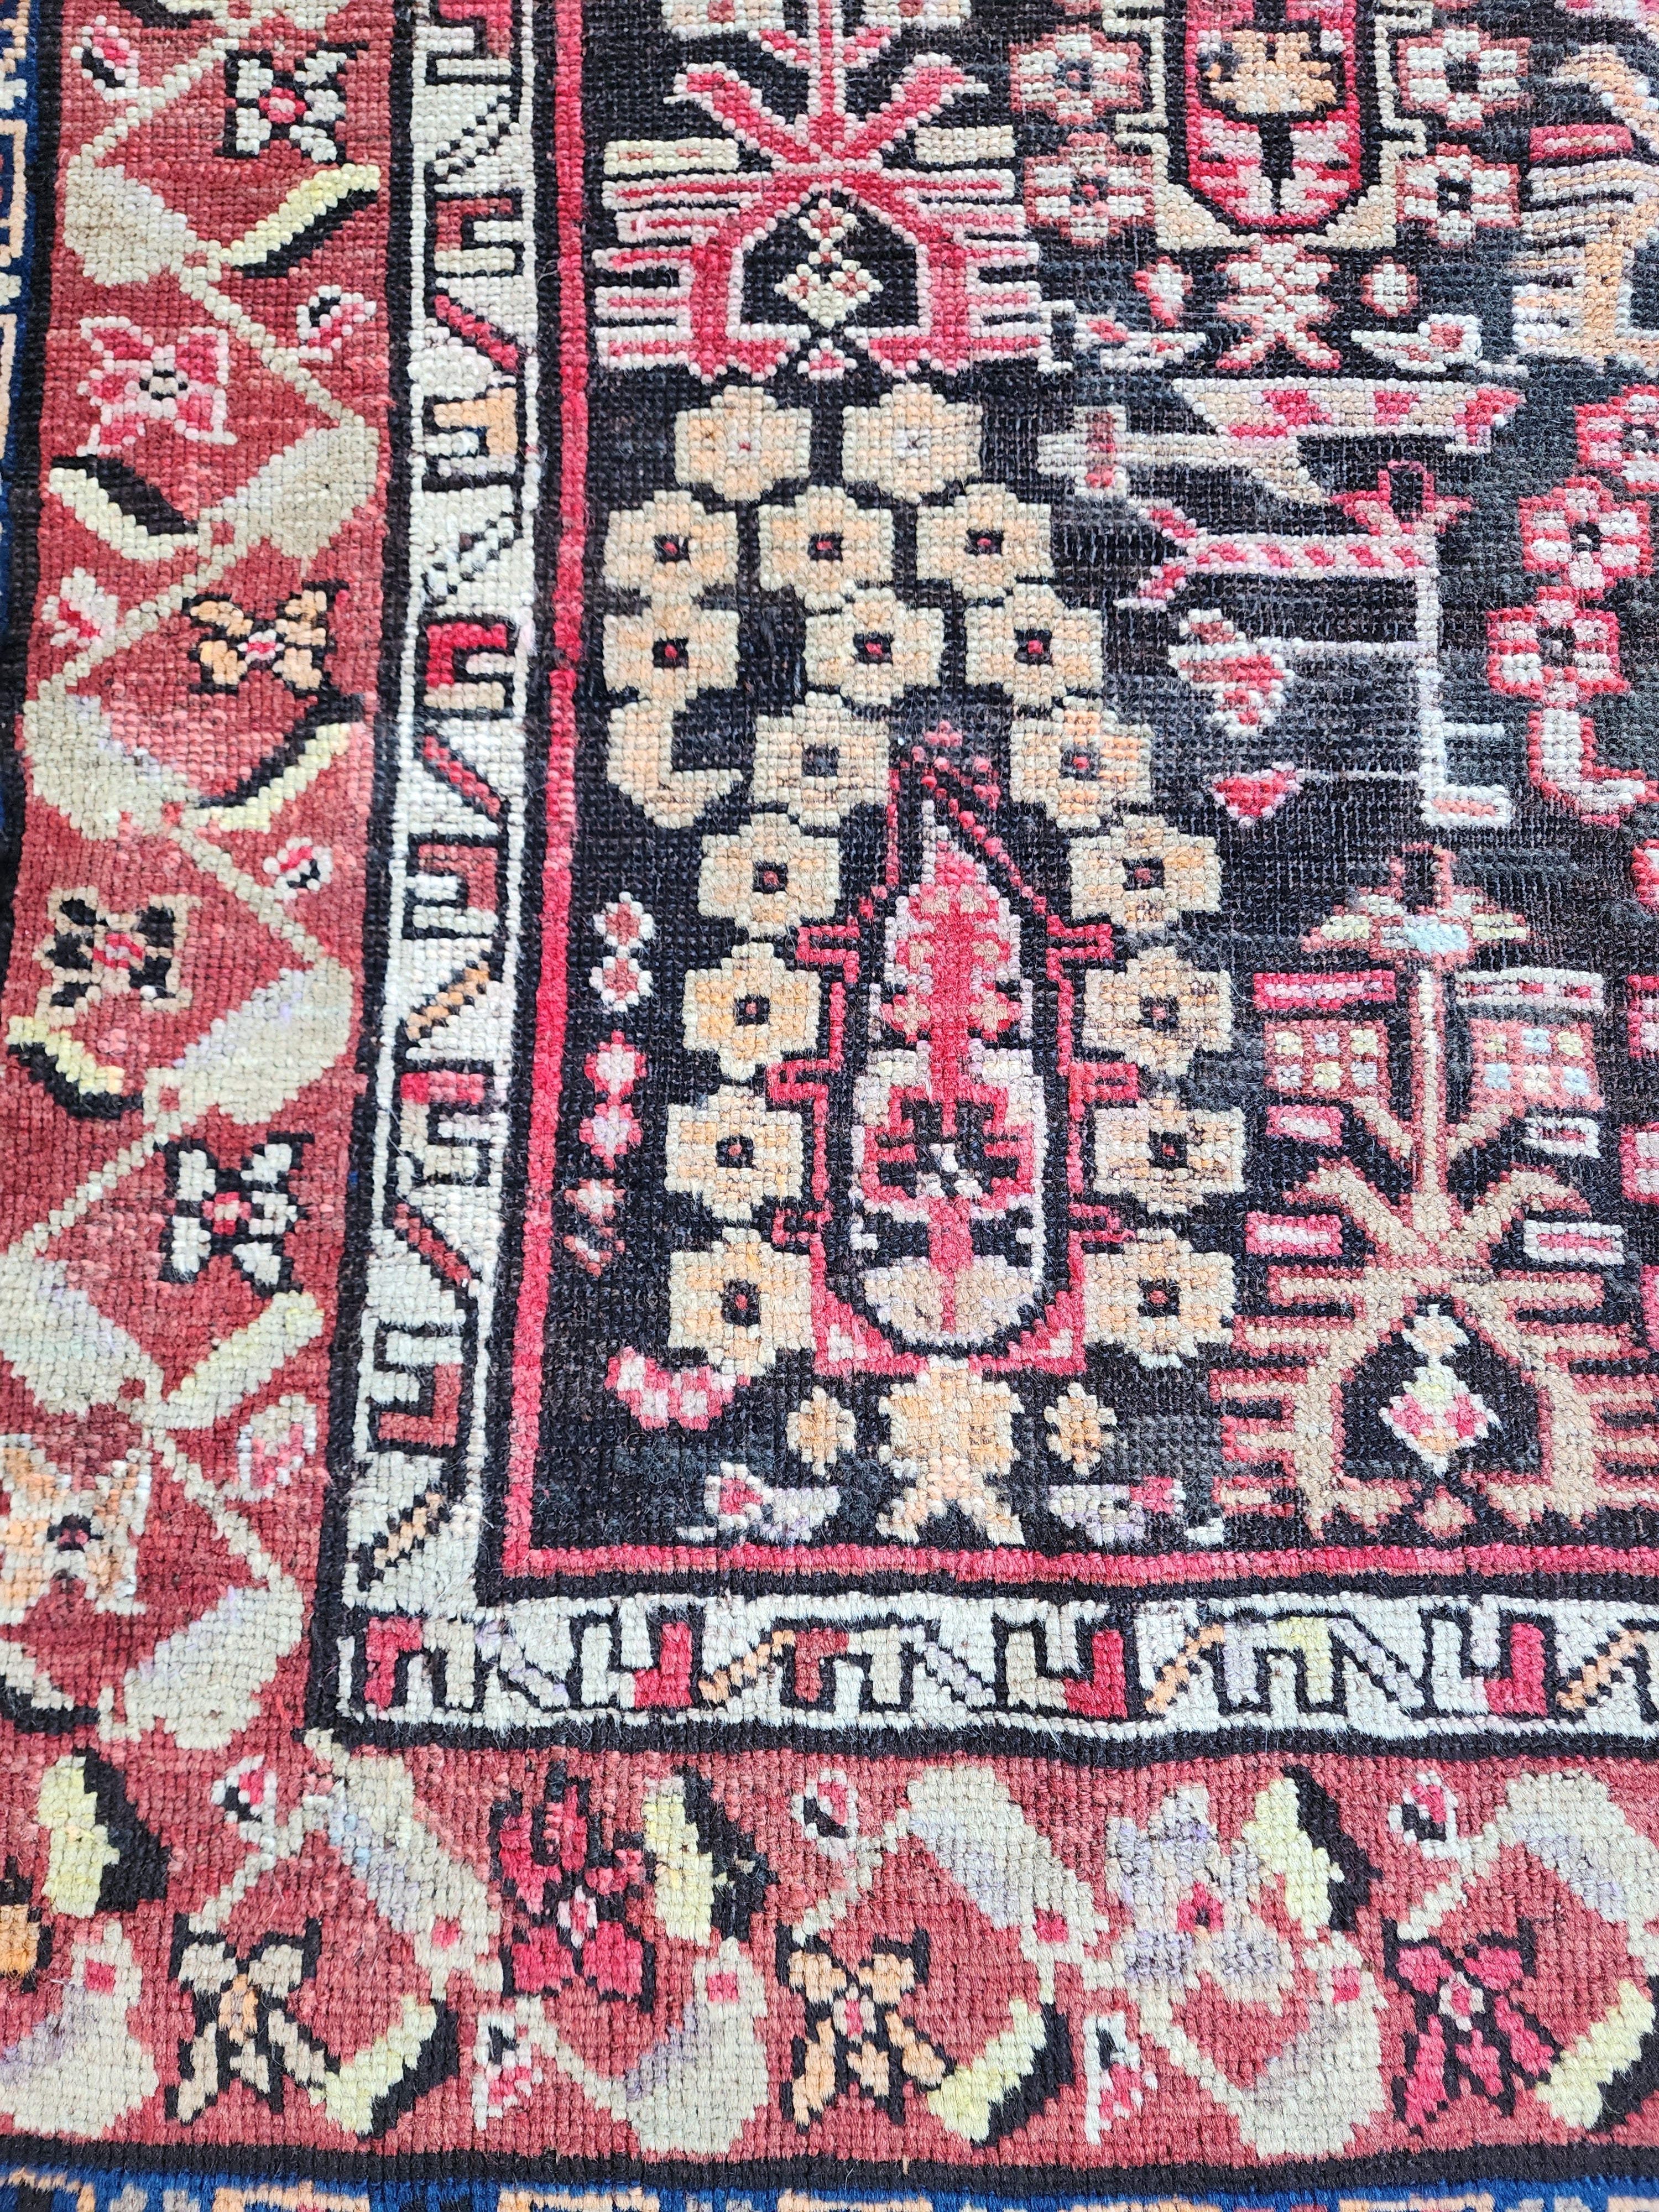 Antique Cacuasion Rug 6 ft 1 in x 3 ft 5 in, Red, Blue and White Floral Design Turkish Small Runner Rug Handmade fron Natural Wool